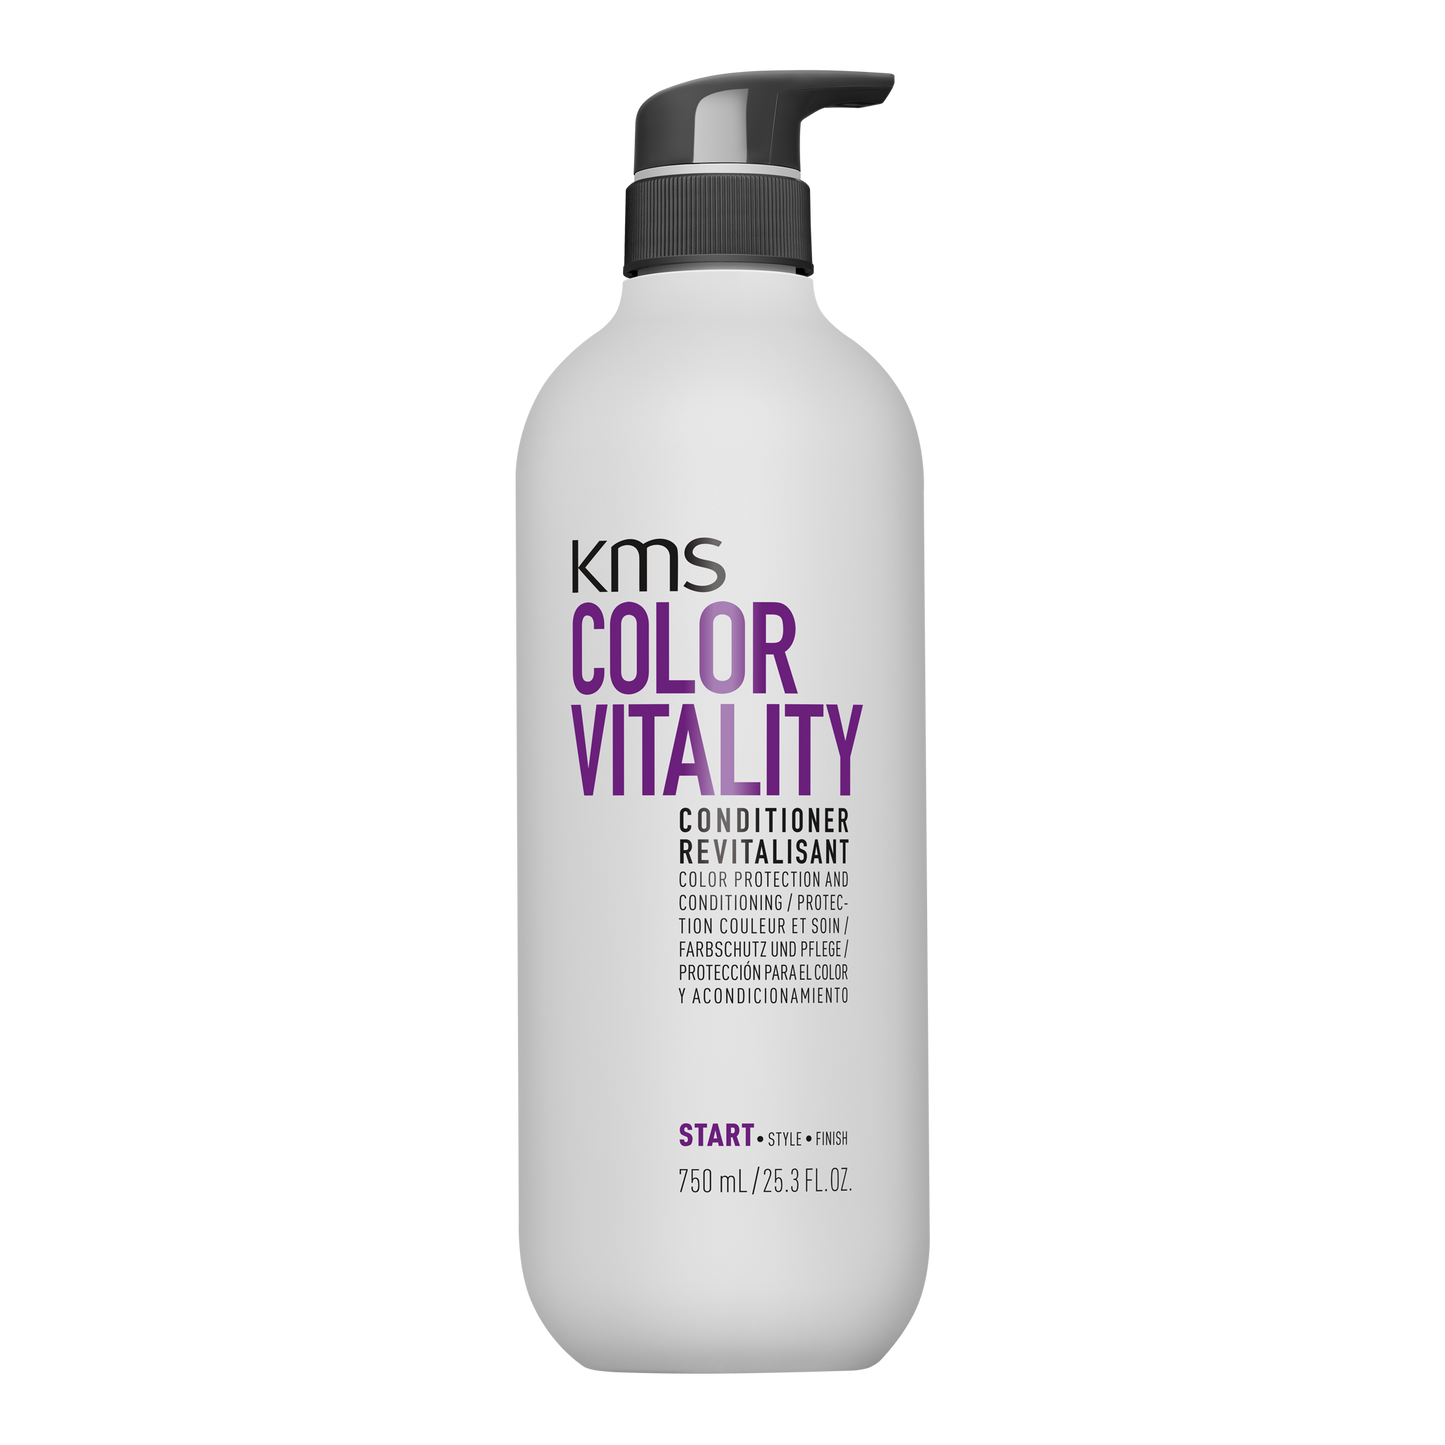 KMS COLORVITALITY Conditioner 750mL